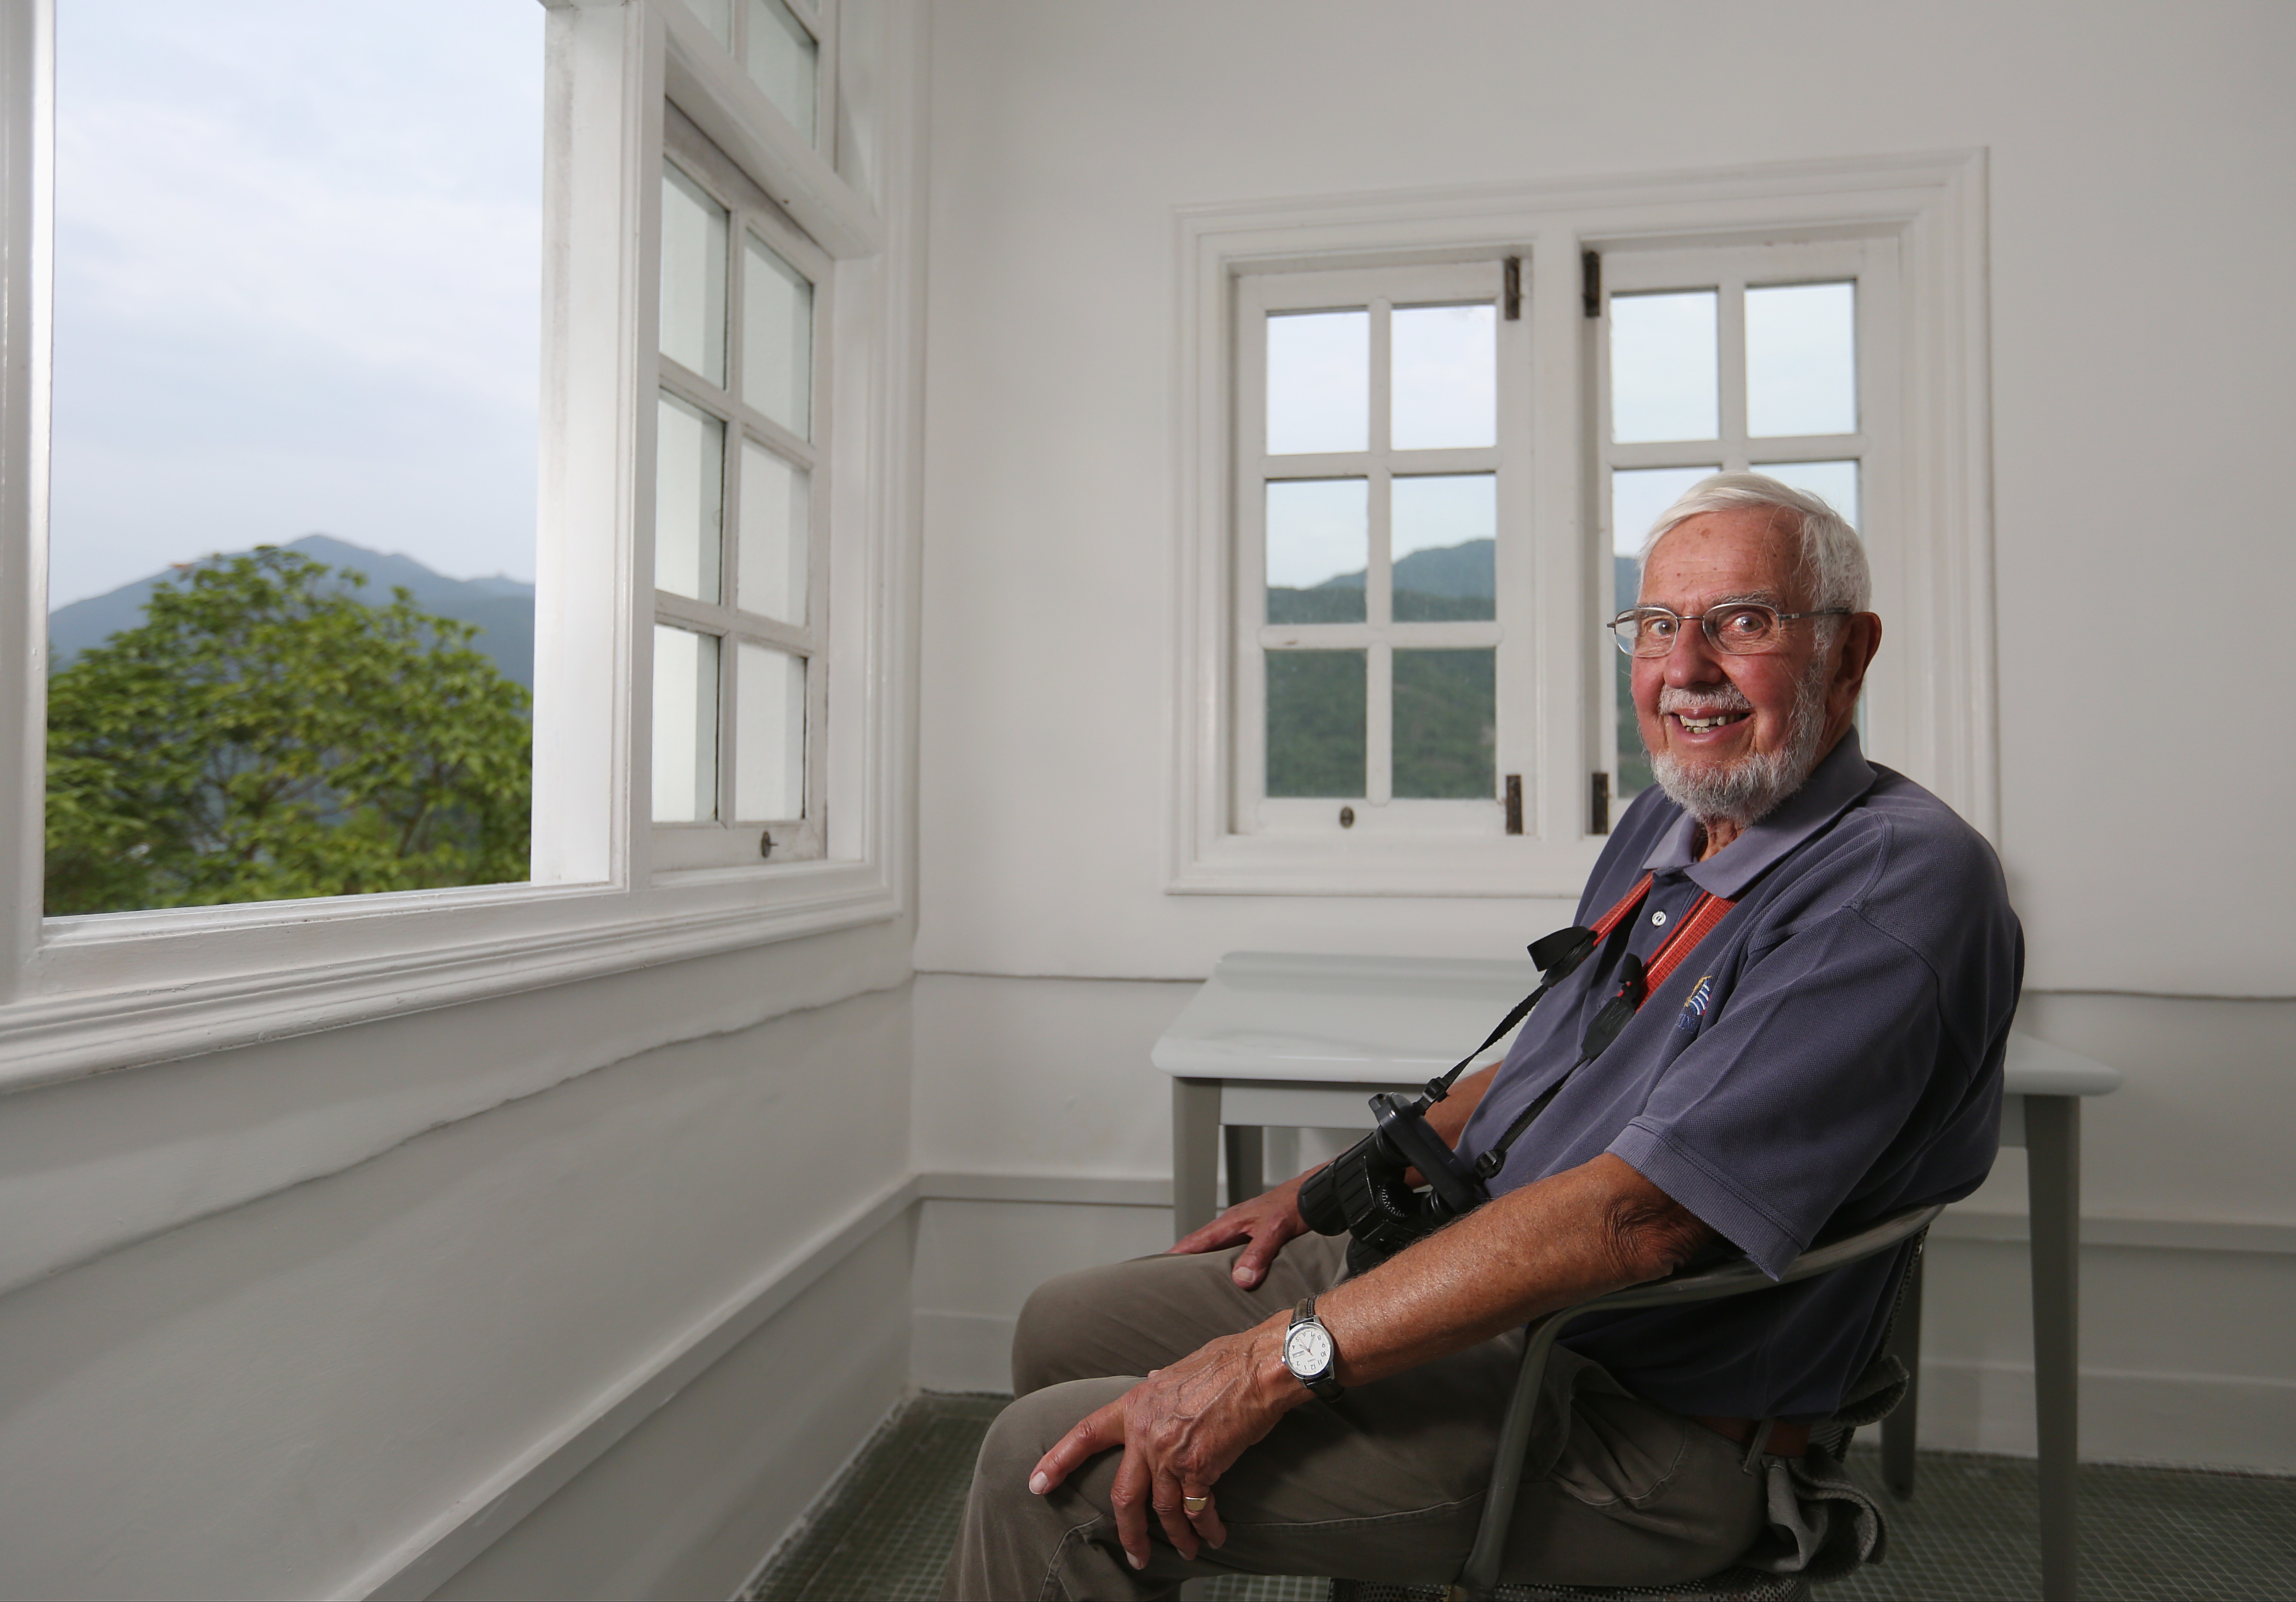 Dr Jim Flegg, ornithologist who was guest of honour at recent eco-education event, steps inside his former Hong Kong home for the first time since he was a child and wartime evacuation to Australia heralded a life steeped in nature